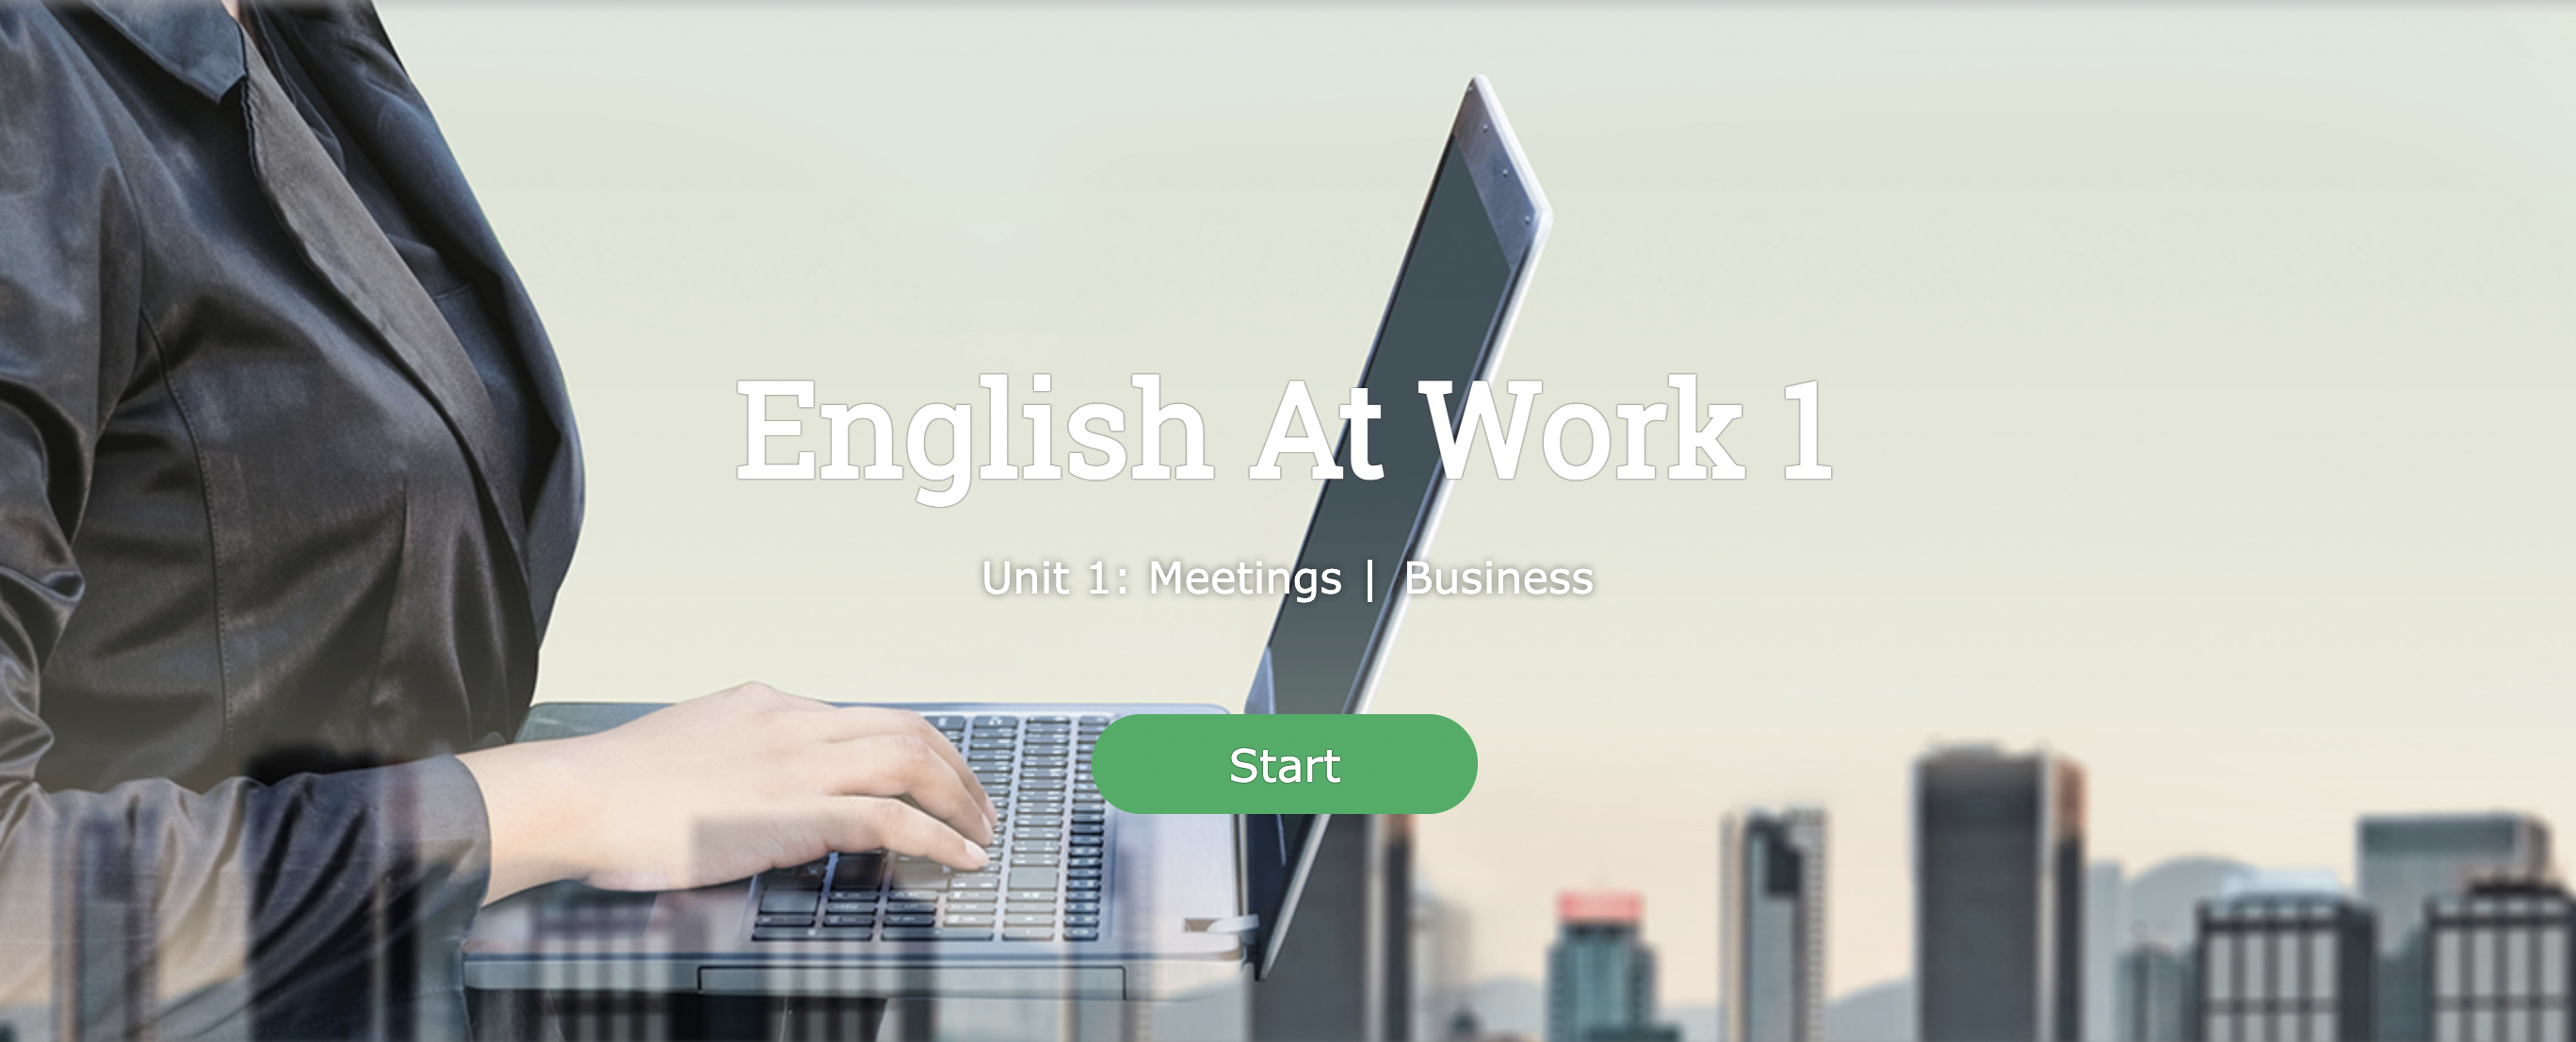 English for work